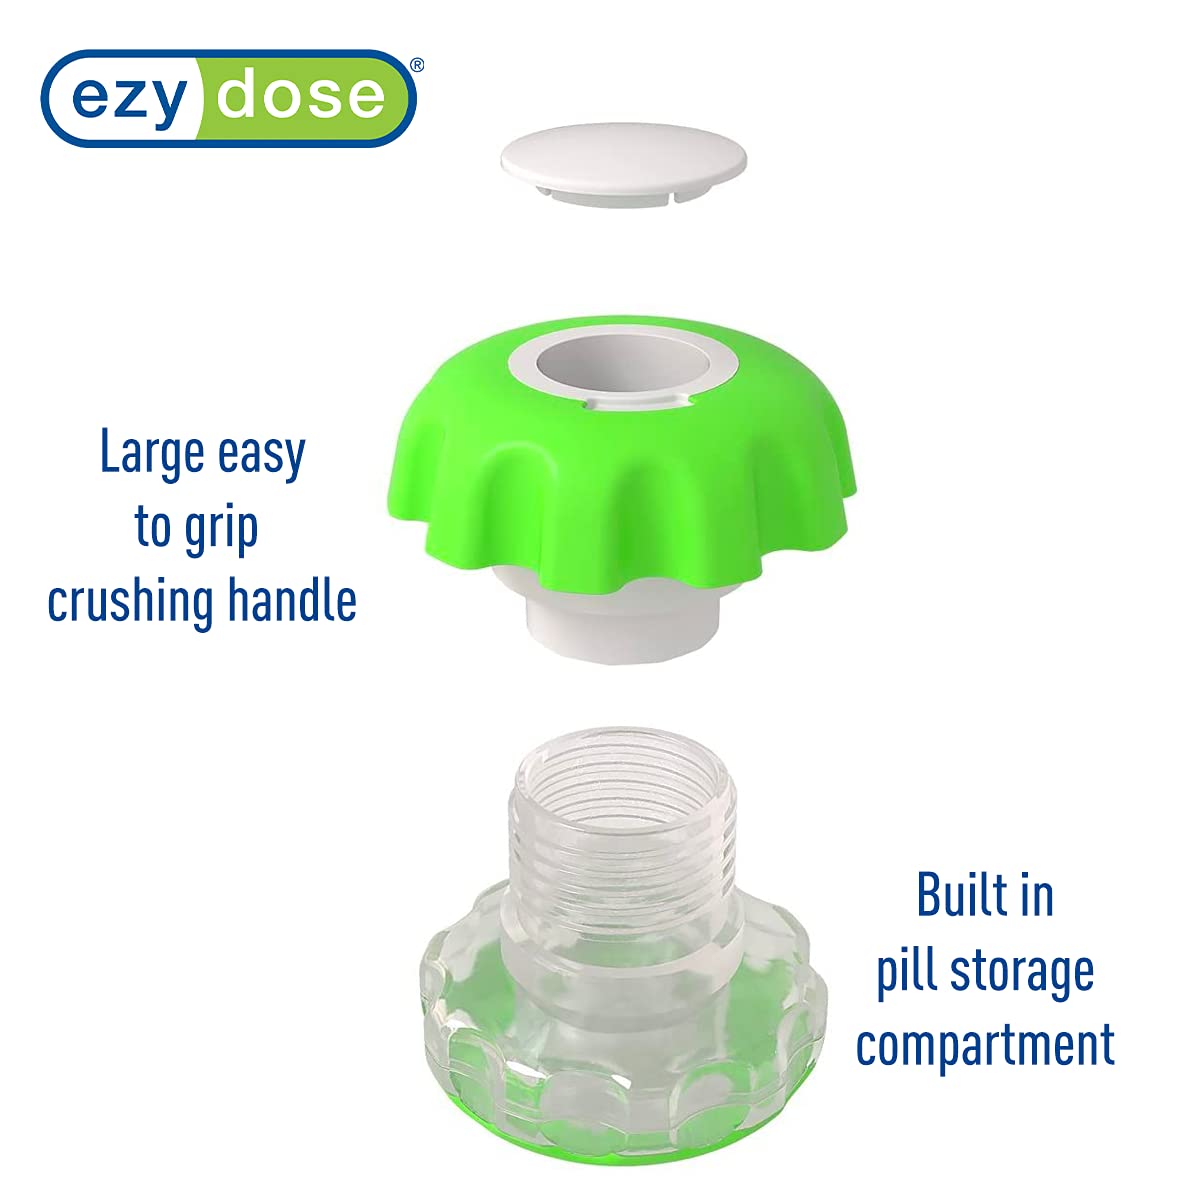 EZY DOSE Crush Pill, Vitamins, Tablets Crusher and Grinder, Storage Compartment, Colors May Vary, Large